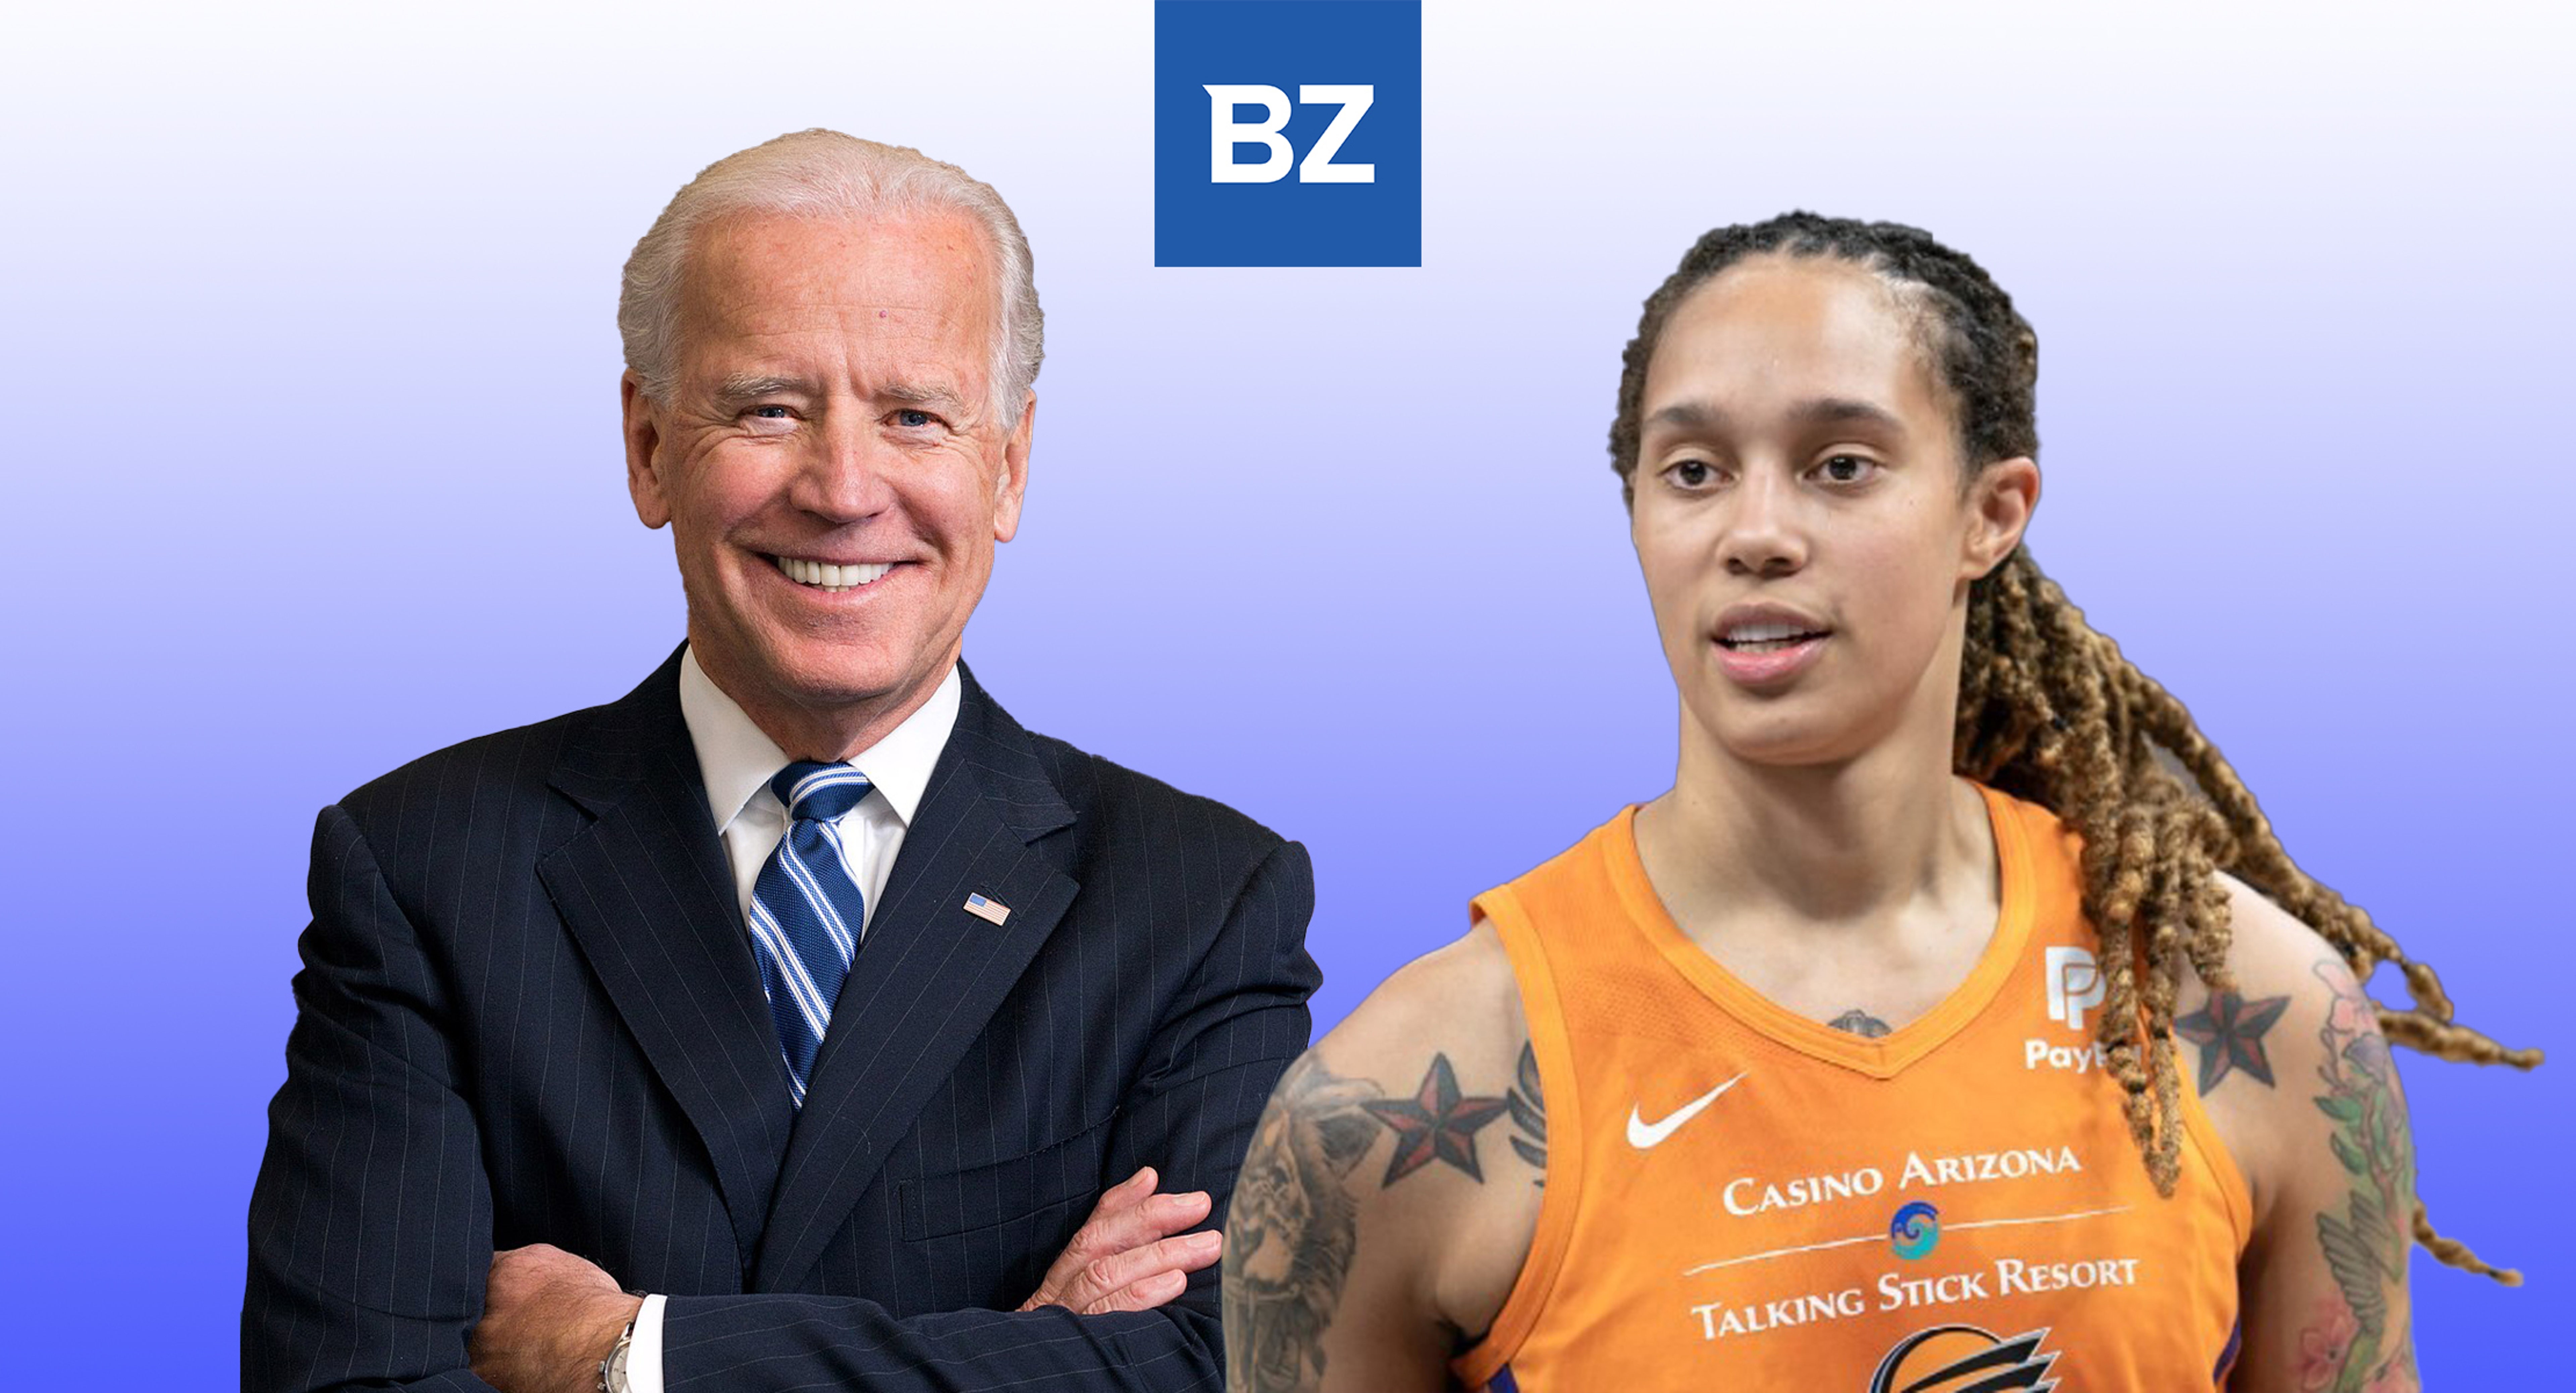 Biden Speaks To Brittney Griner&#39;s Wife Cherelle: He&#39;s Pursuing &#39;Every Avenue&#39; To Bring WNBA Star Home From Russia